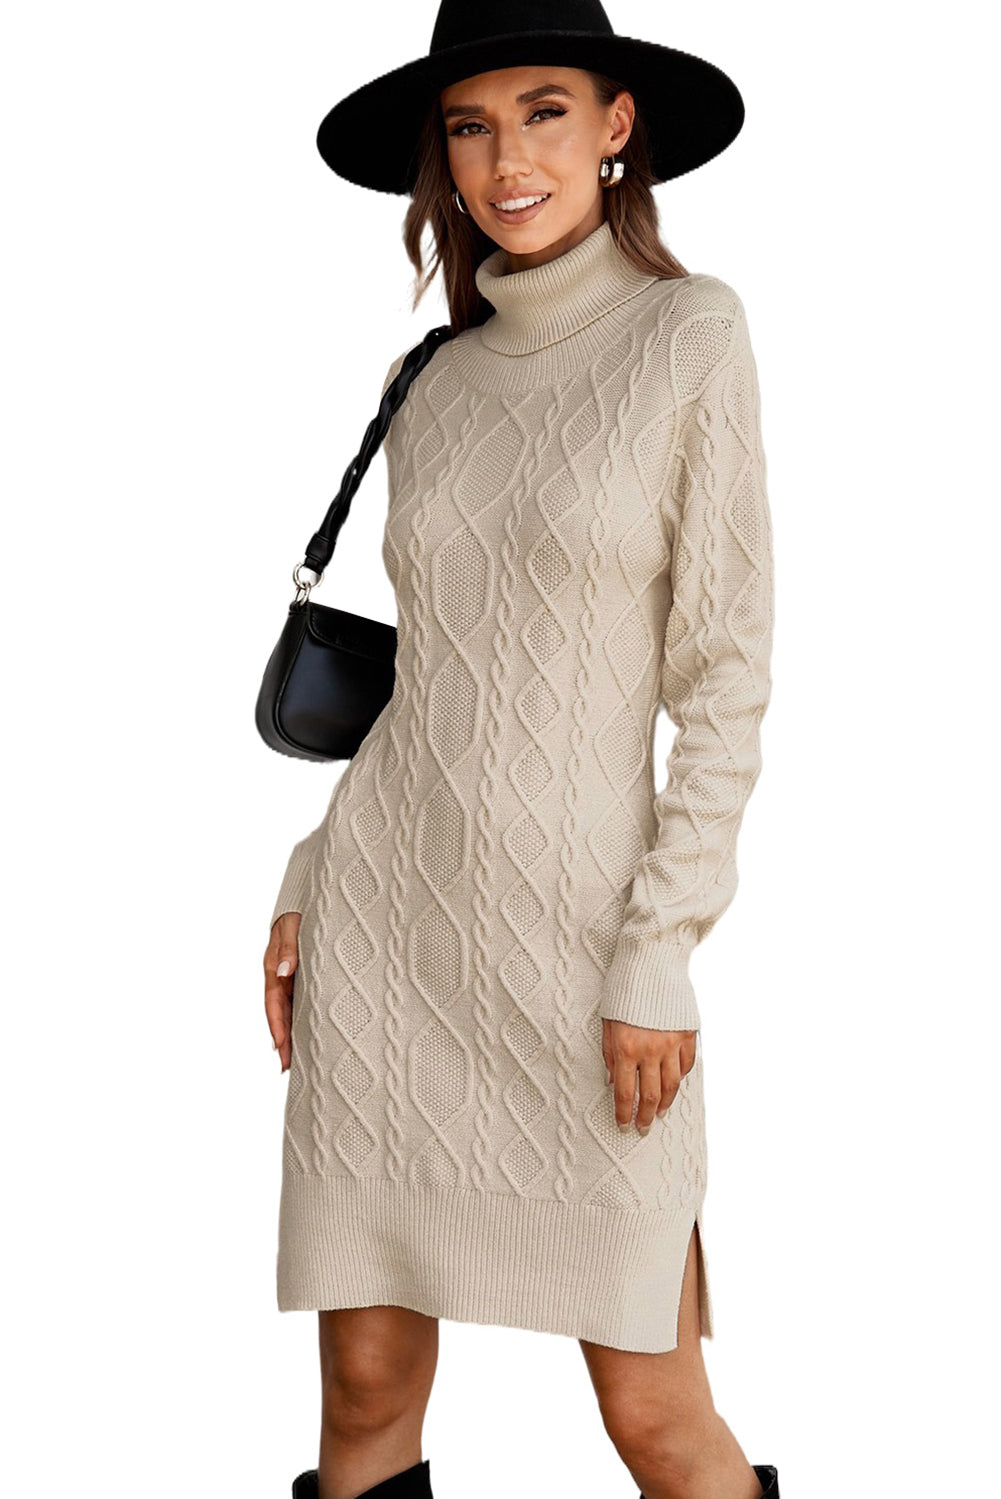 Turtleneck Pullover Textured Pattern Bodycon Sweater Dress With Slits